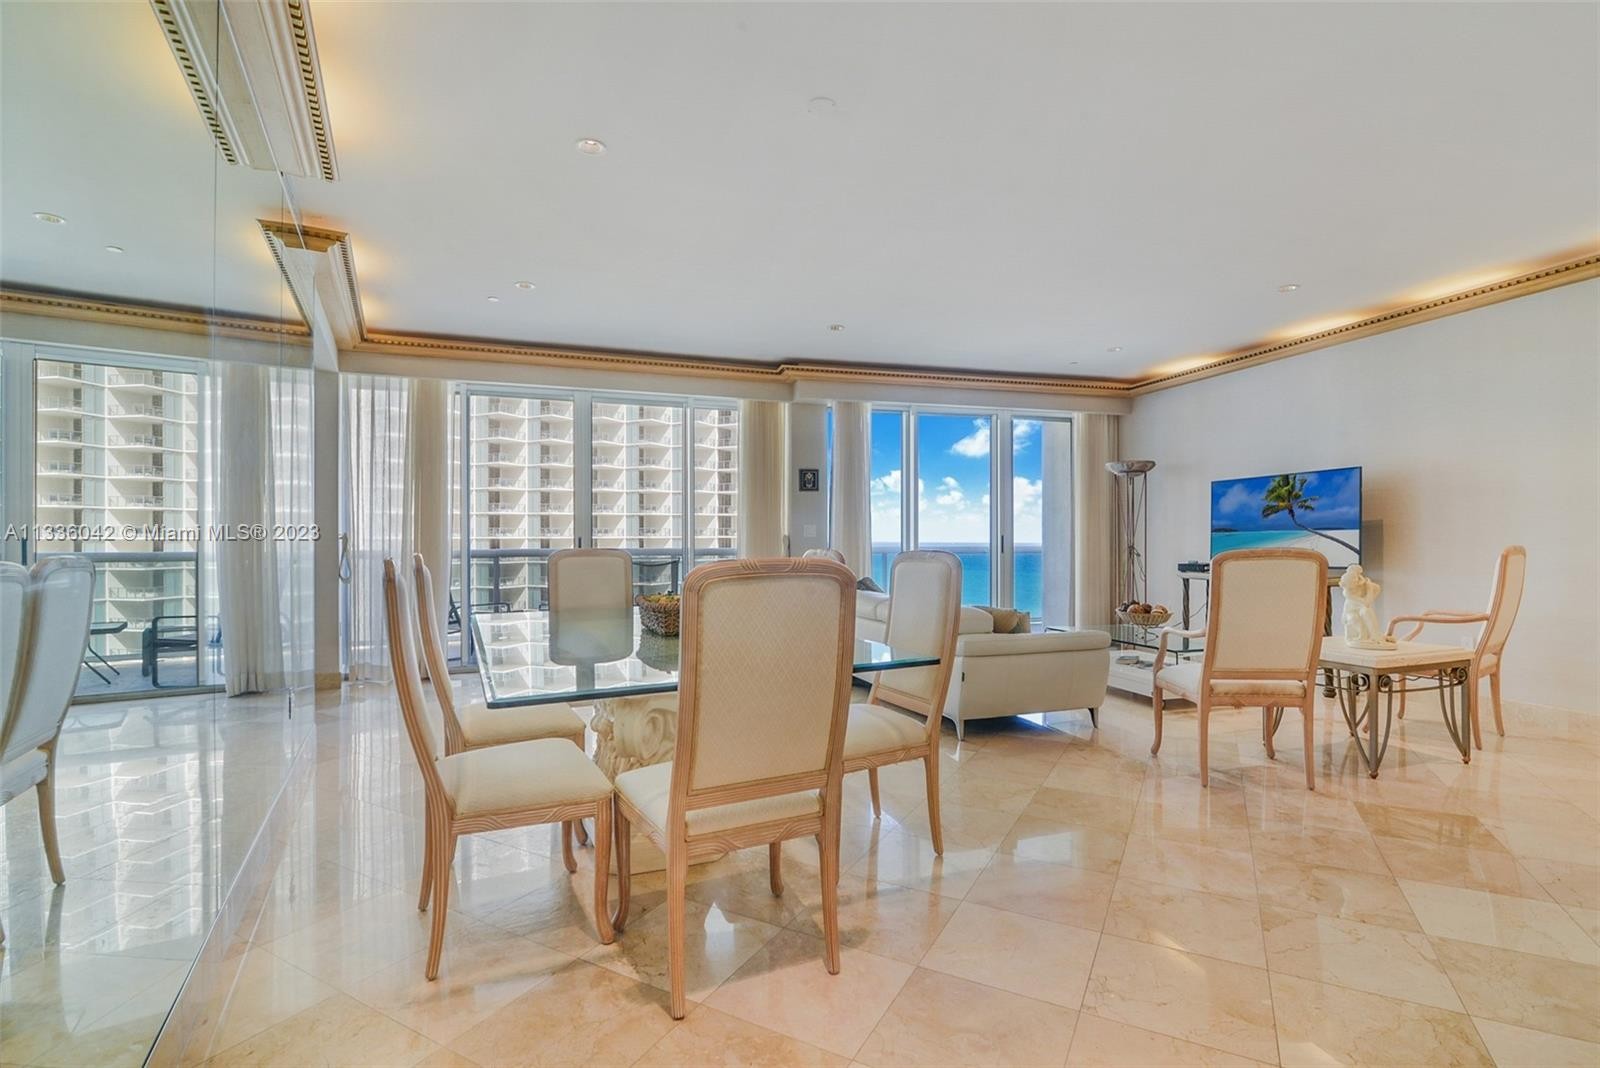 3. 9601 Collins Ave